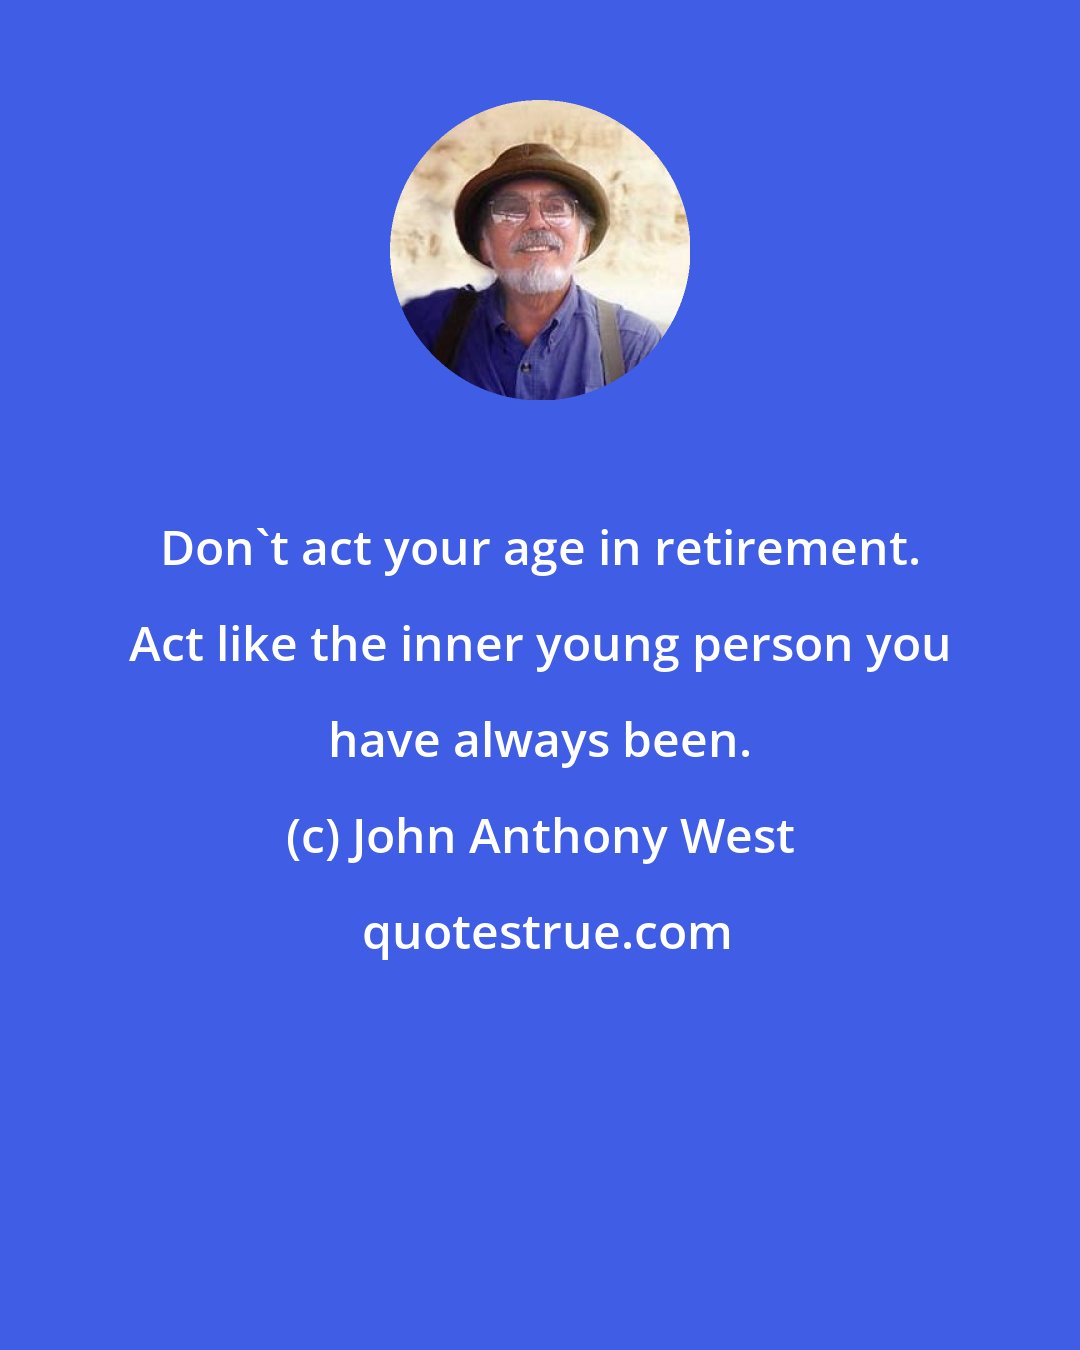 John Anthony West: Don't act your age in retirement. Act like the inner young person you have always been.